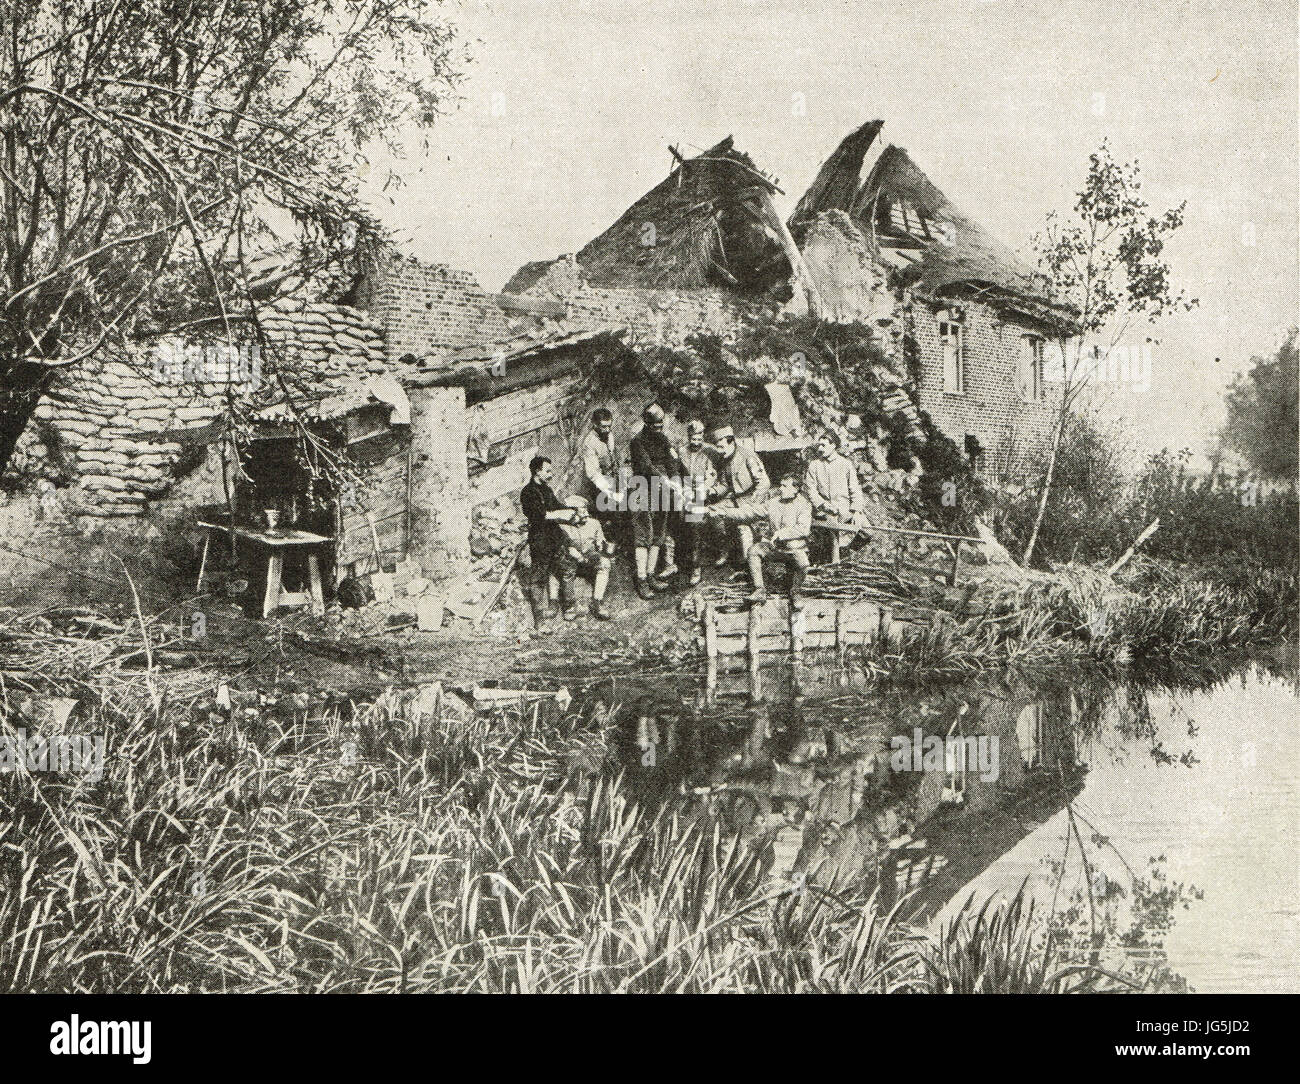 Aid station in ruined farmhouse near Flanders front, 1917 Stock Photo